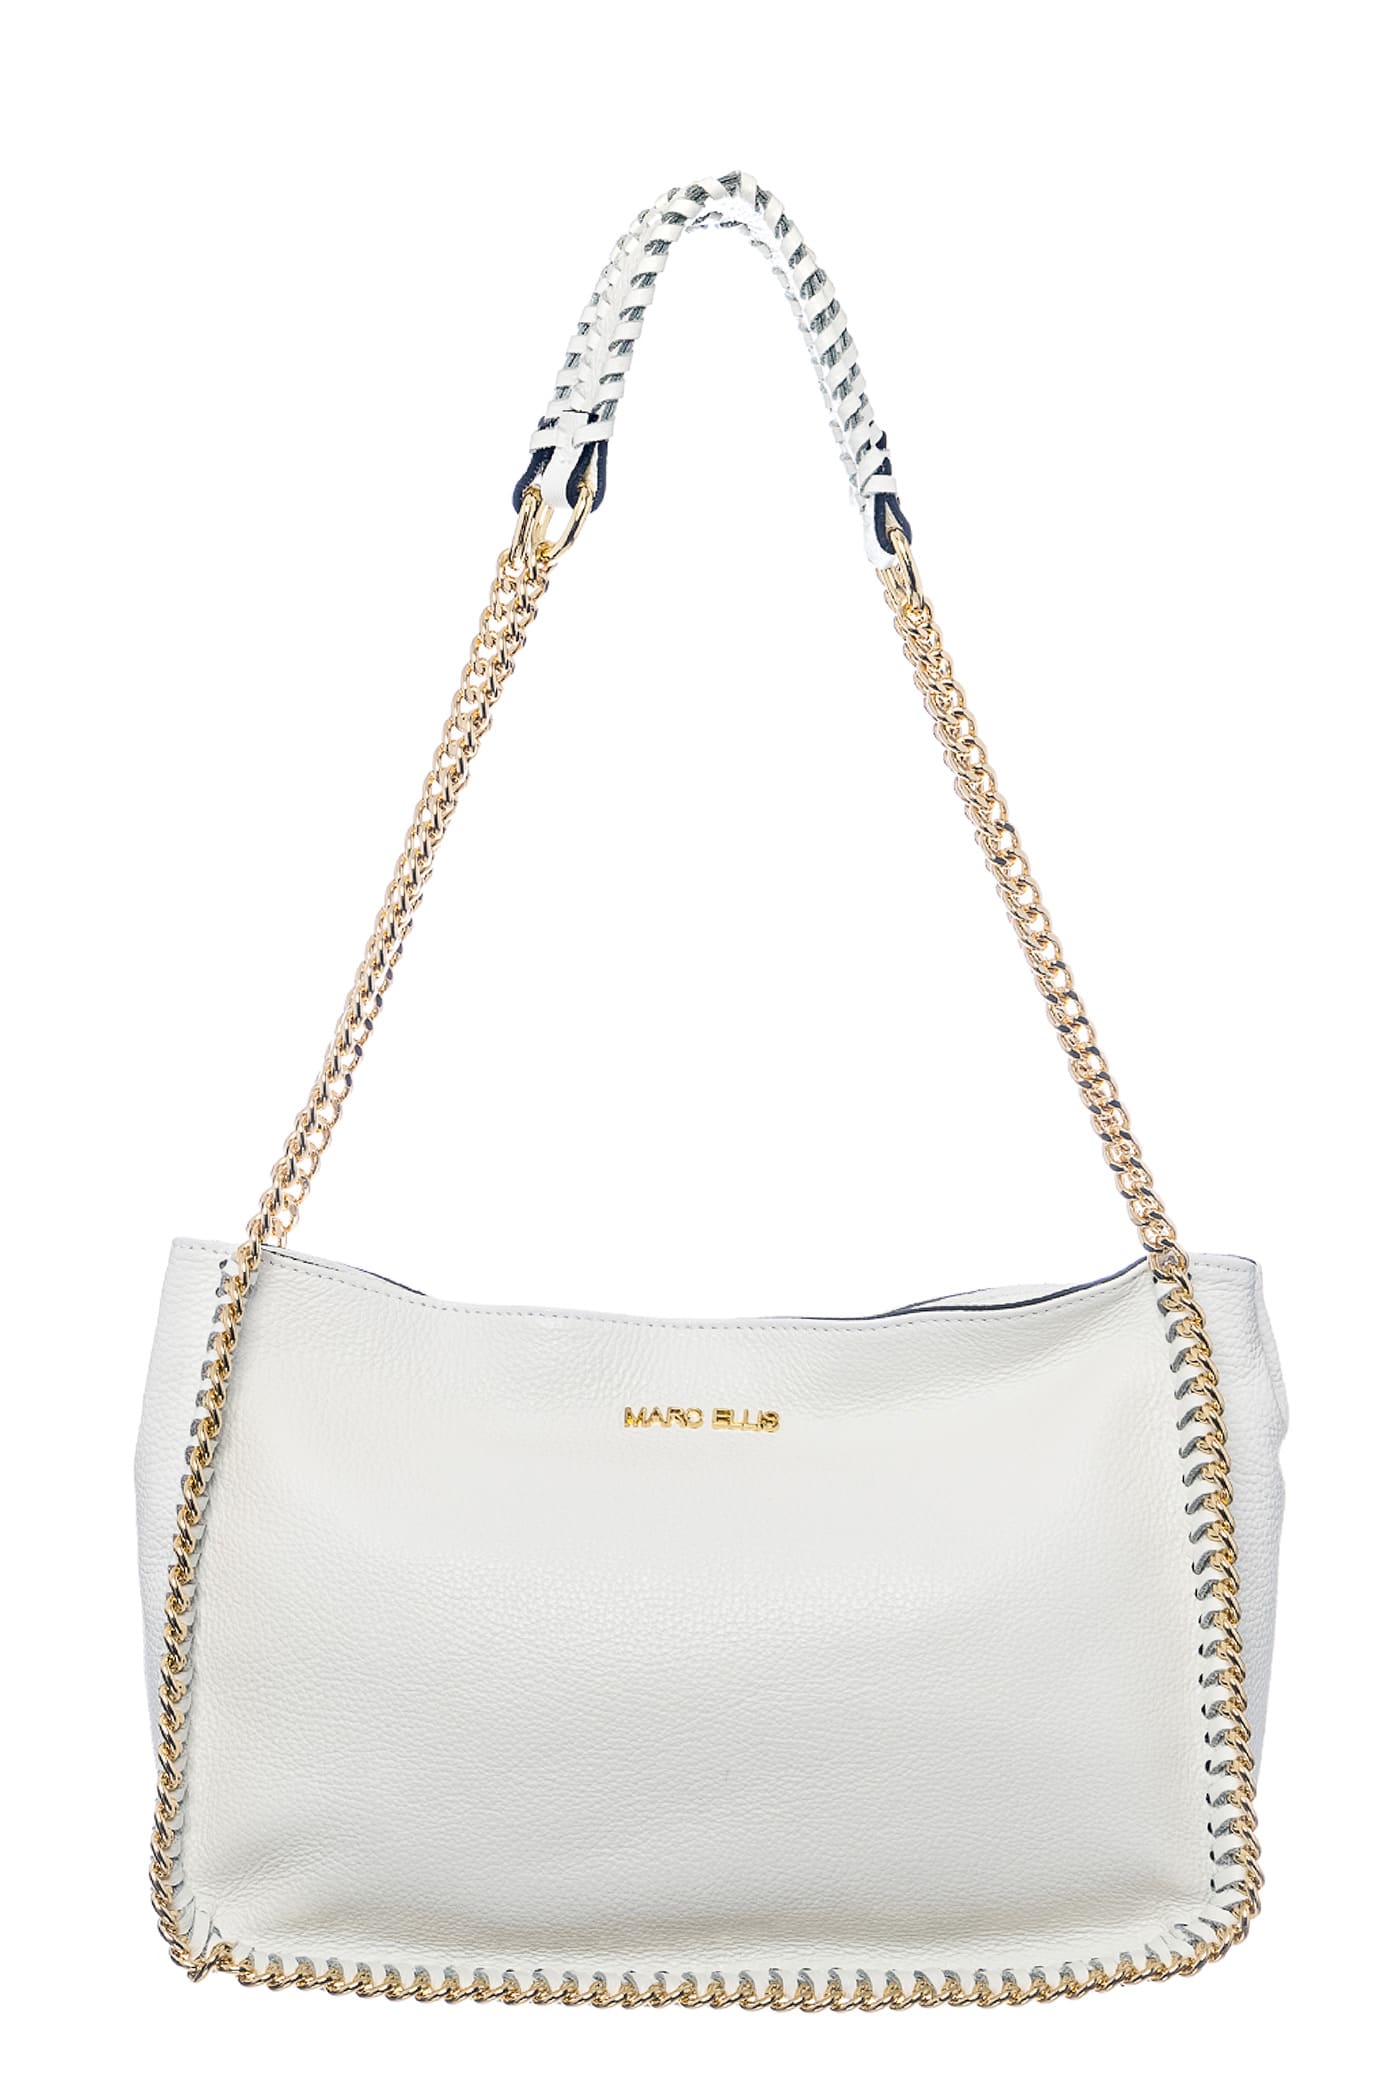 Marc Ellis Madeline M Tote In White Leather